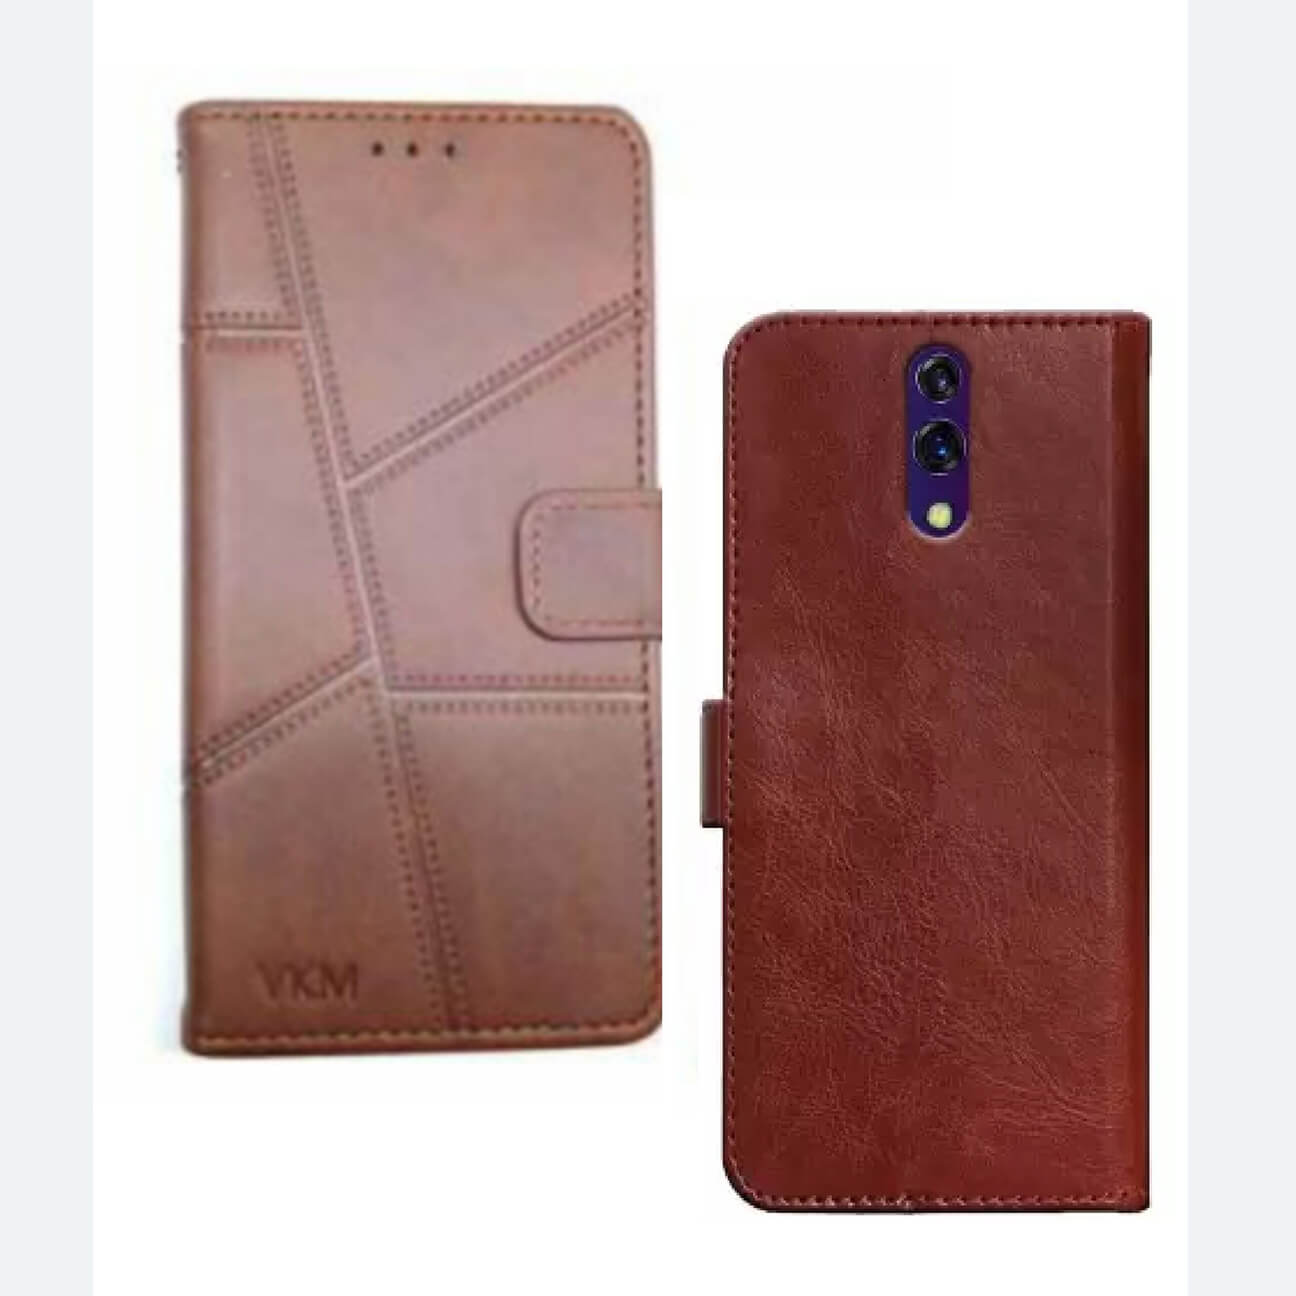 Oppo A33 (2020) Flip Cover Image